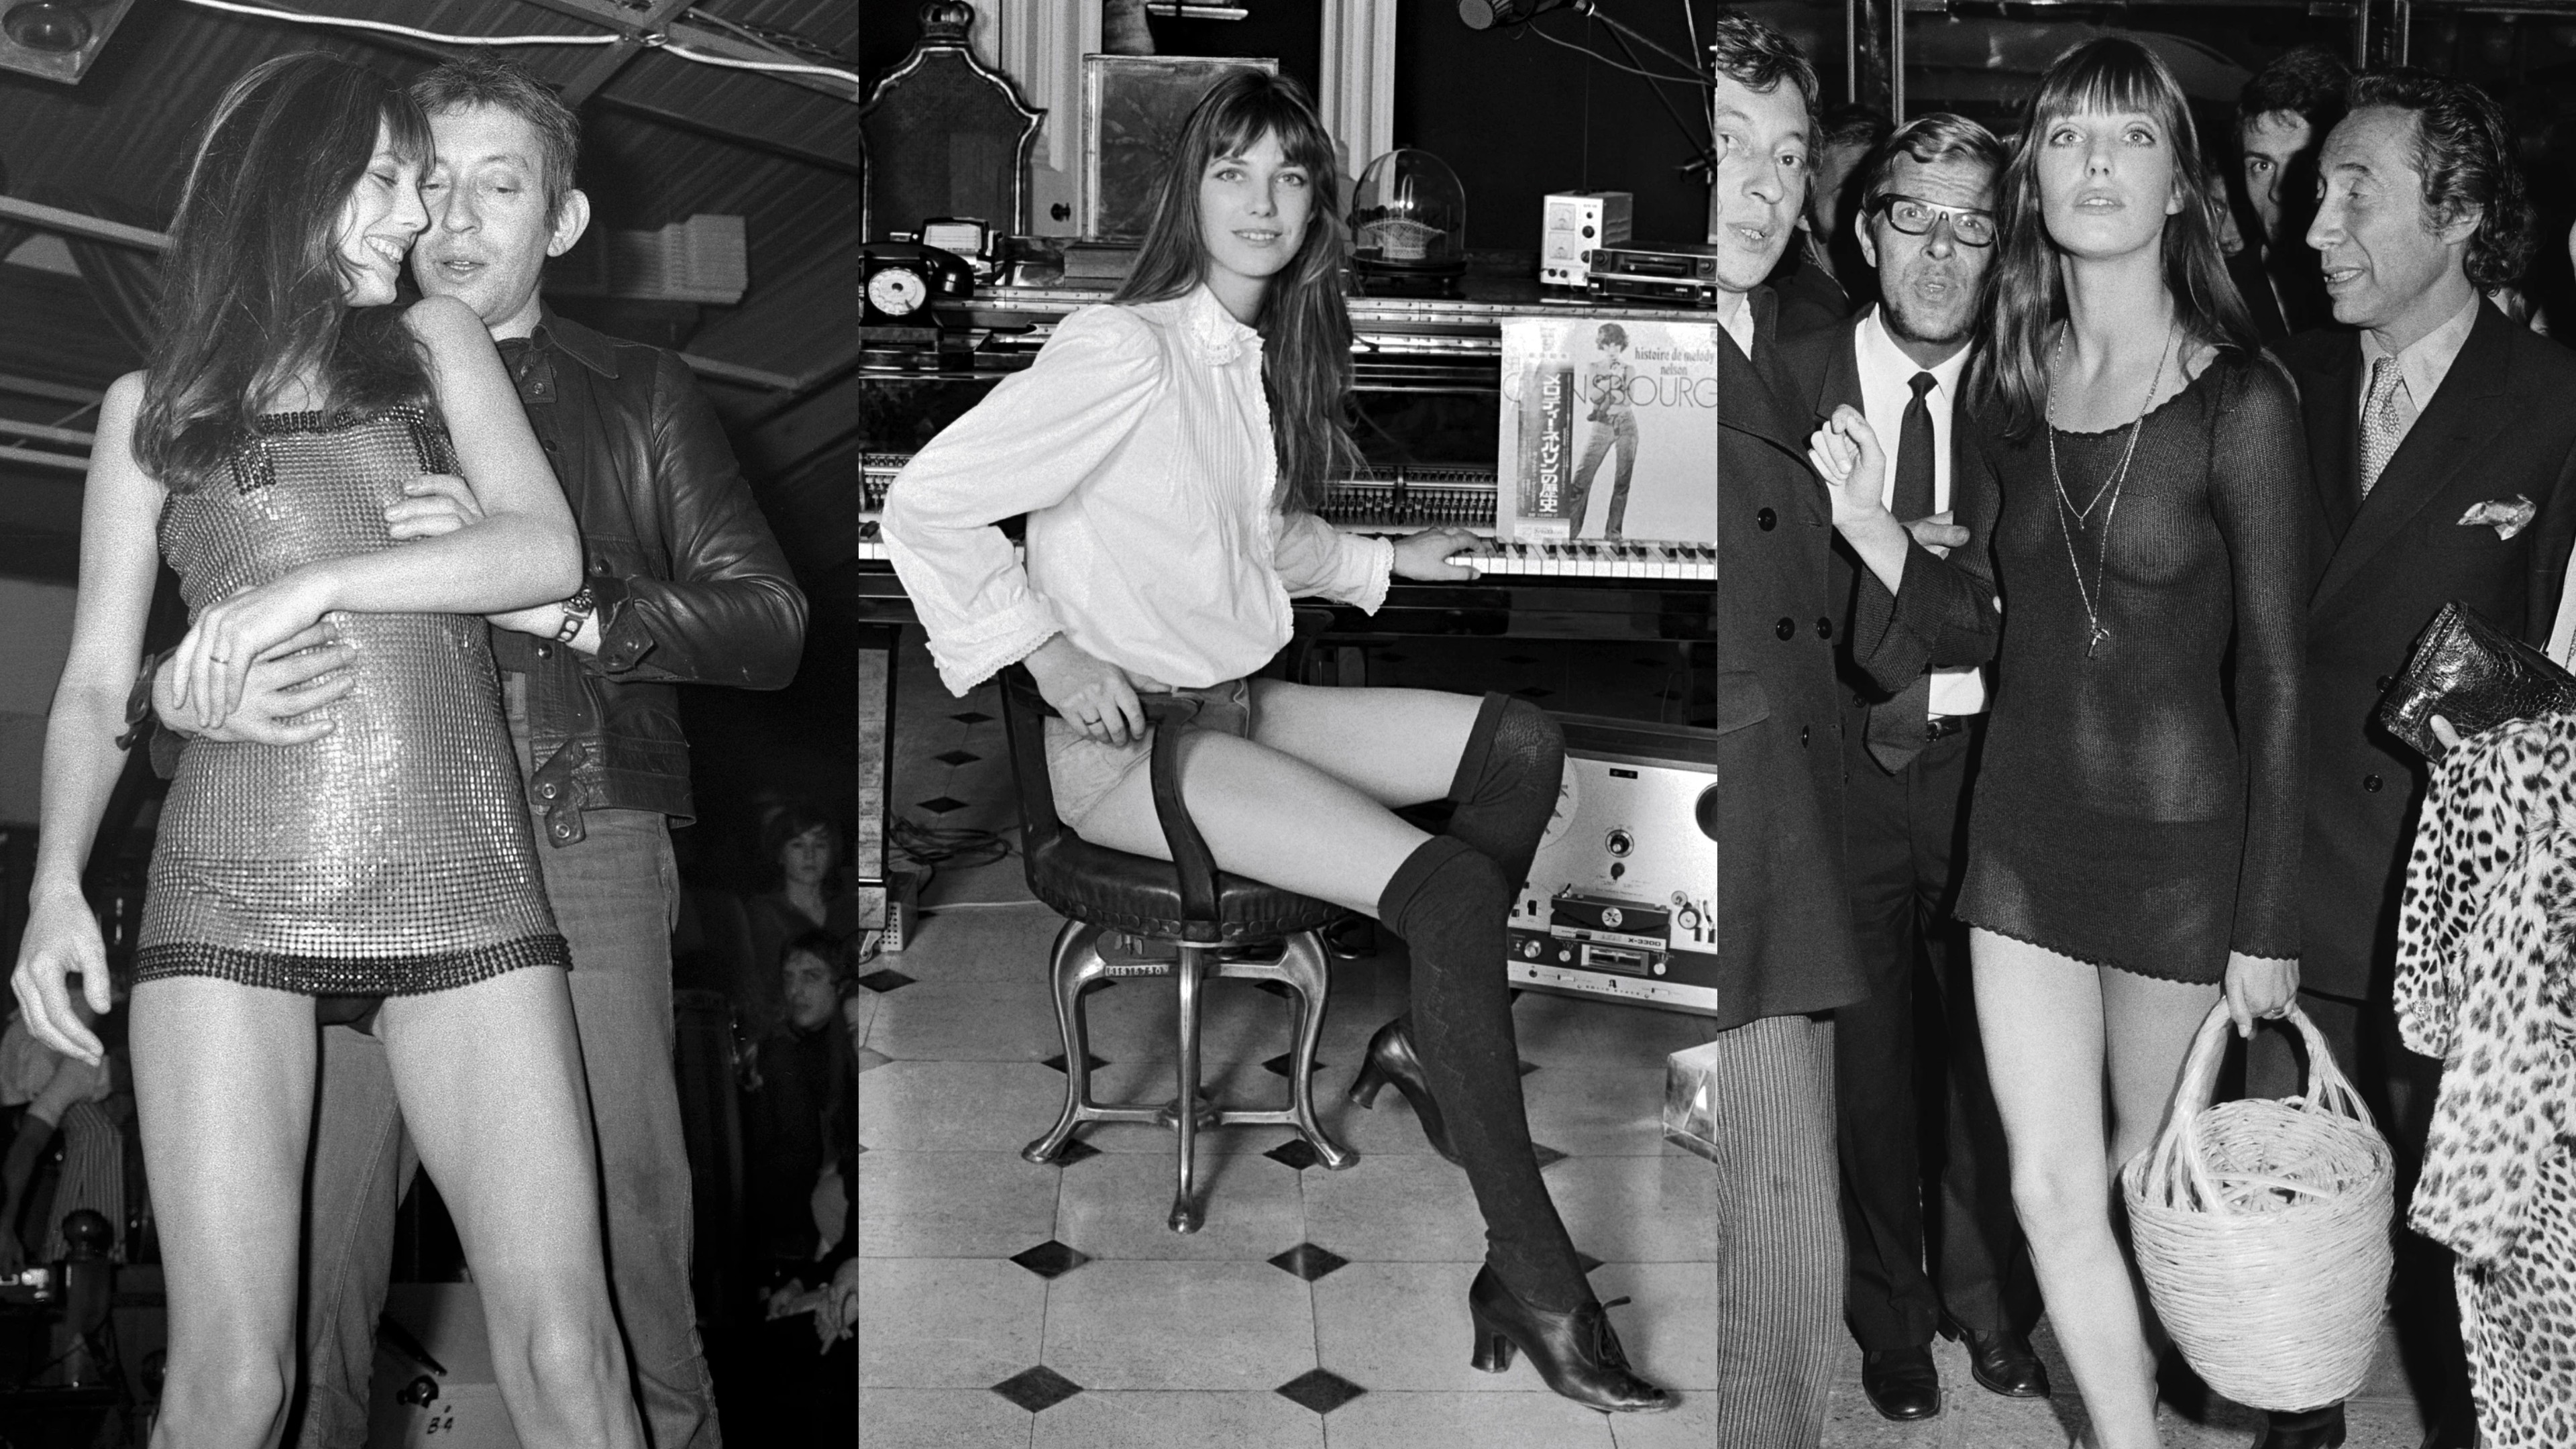 https://video-images.vice.com/articles/5e7cd8261373ee0098aa52c8/social_lede/1689586389868-jane-birkin-iconic-outfits.jpeg?crop=1xw:0.9306xh;0xw,0xh